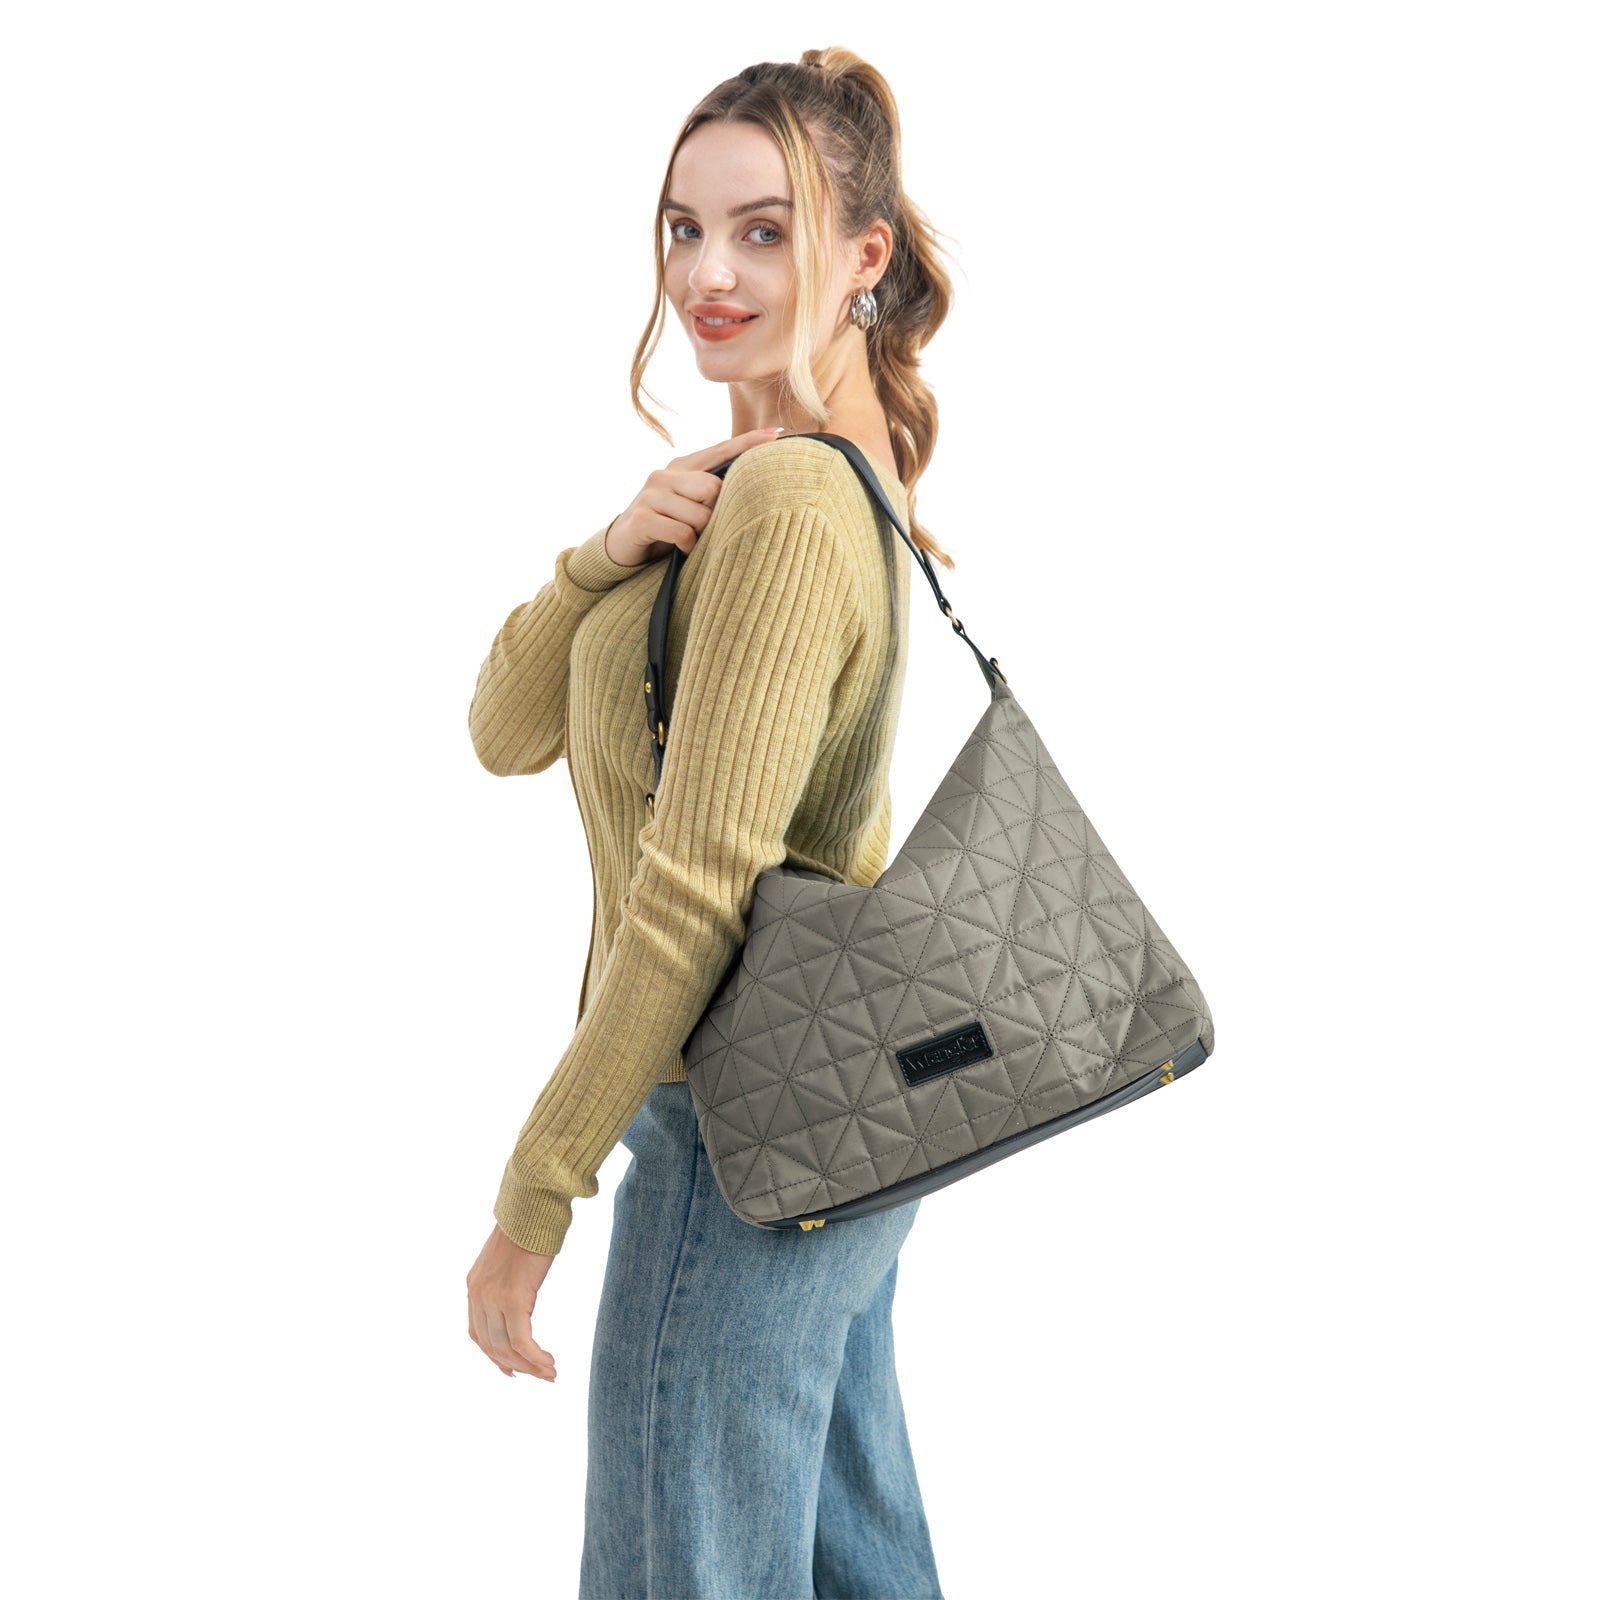 Wrangler Quilted Hobo/Crossbody  (Wrangler by Montana West) - Cowgirl Wear